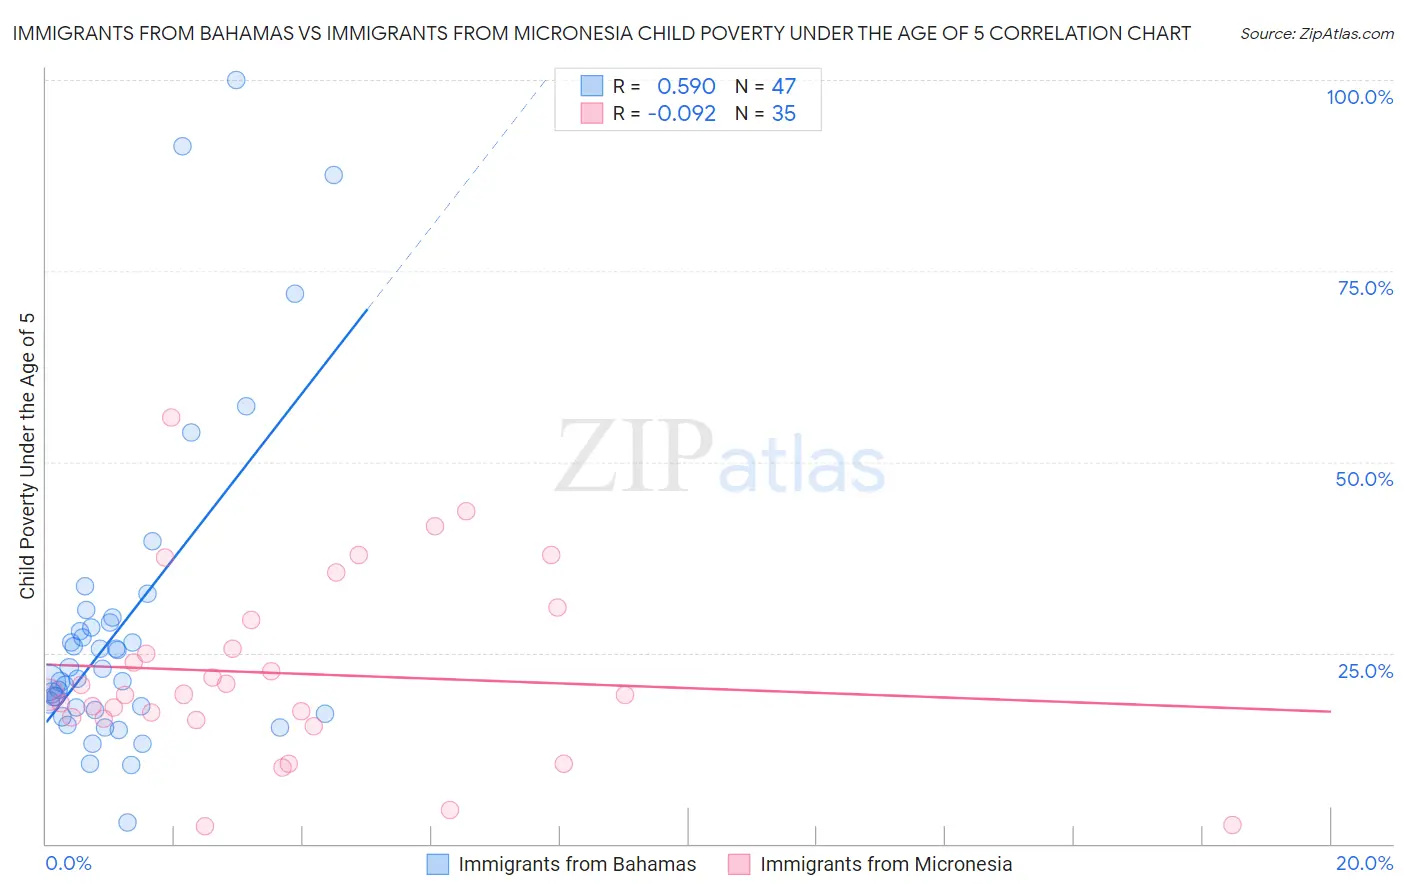 Immigrants from Bahamas vs Immigrants from Micronesia Child Poverty Under the Age of 5